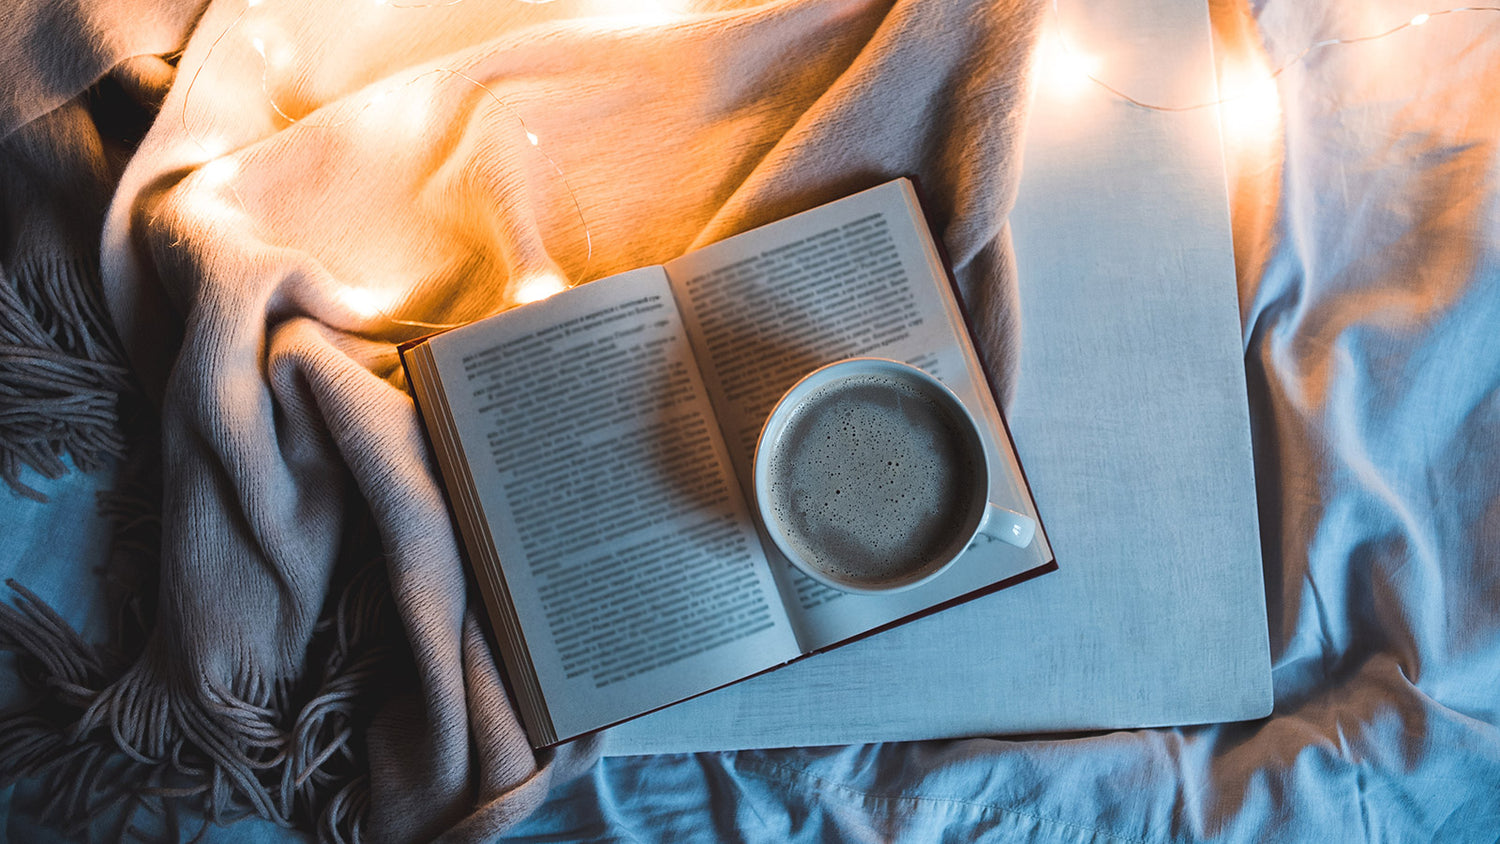 Person prepping for their evening bedtime routine by winding down with a hot beverage and reading a relaxing book.